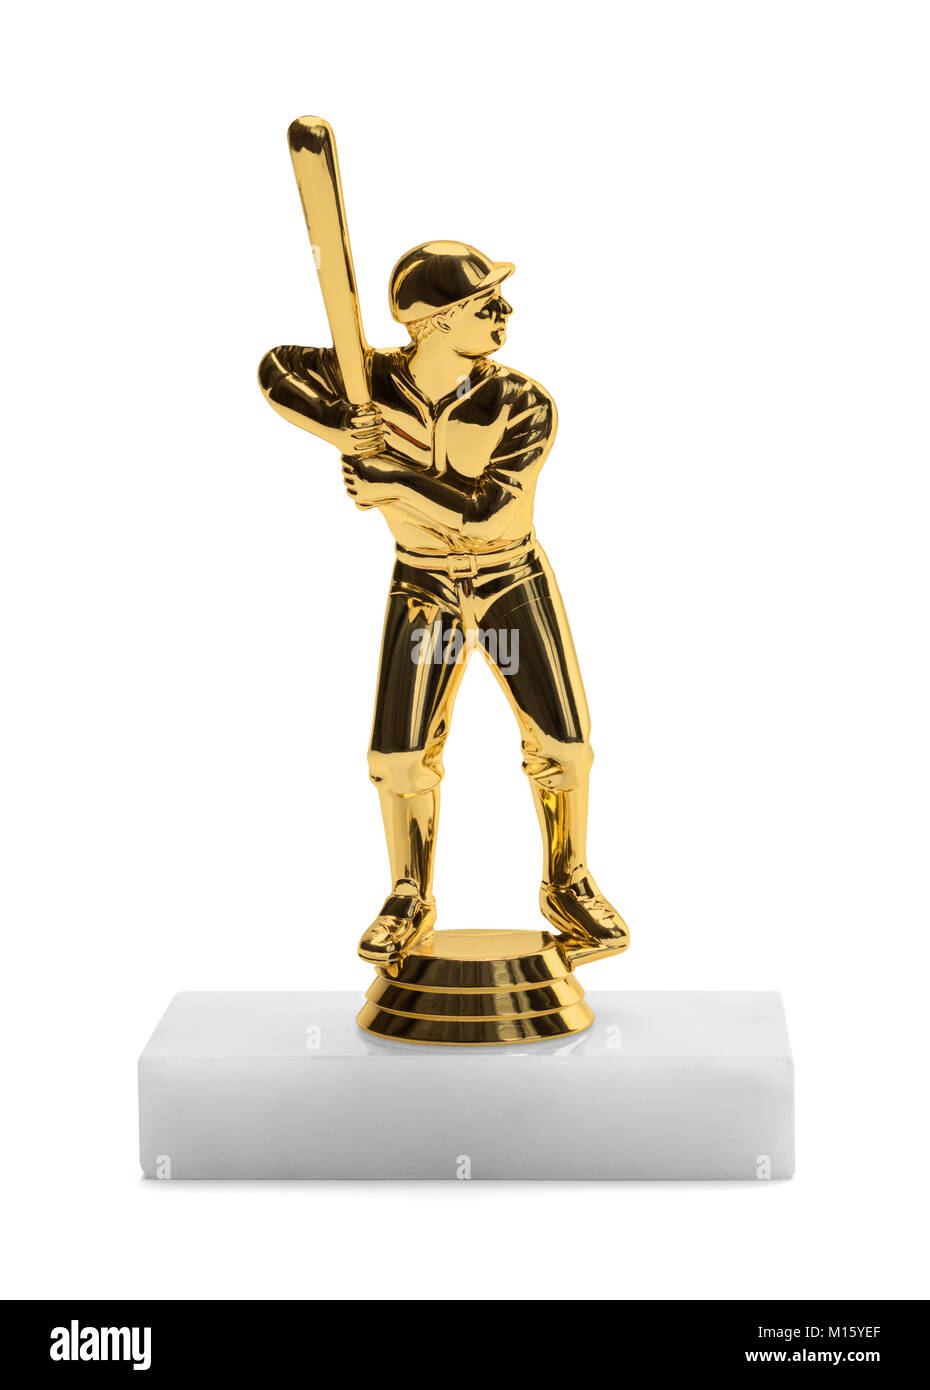 Gold Baseball Trophy Isolated on a White Background. Stock Photo